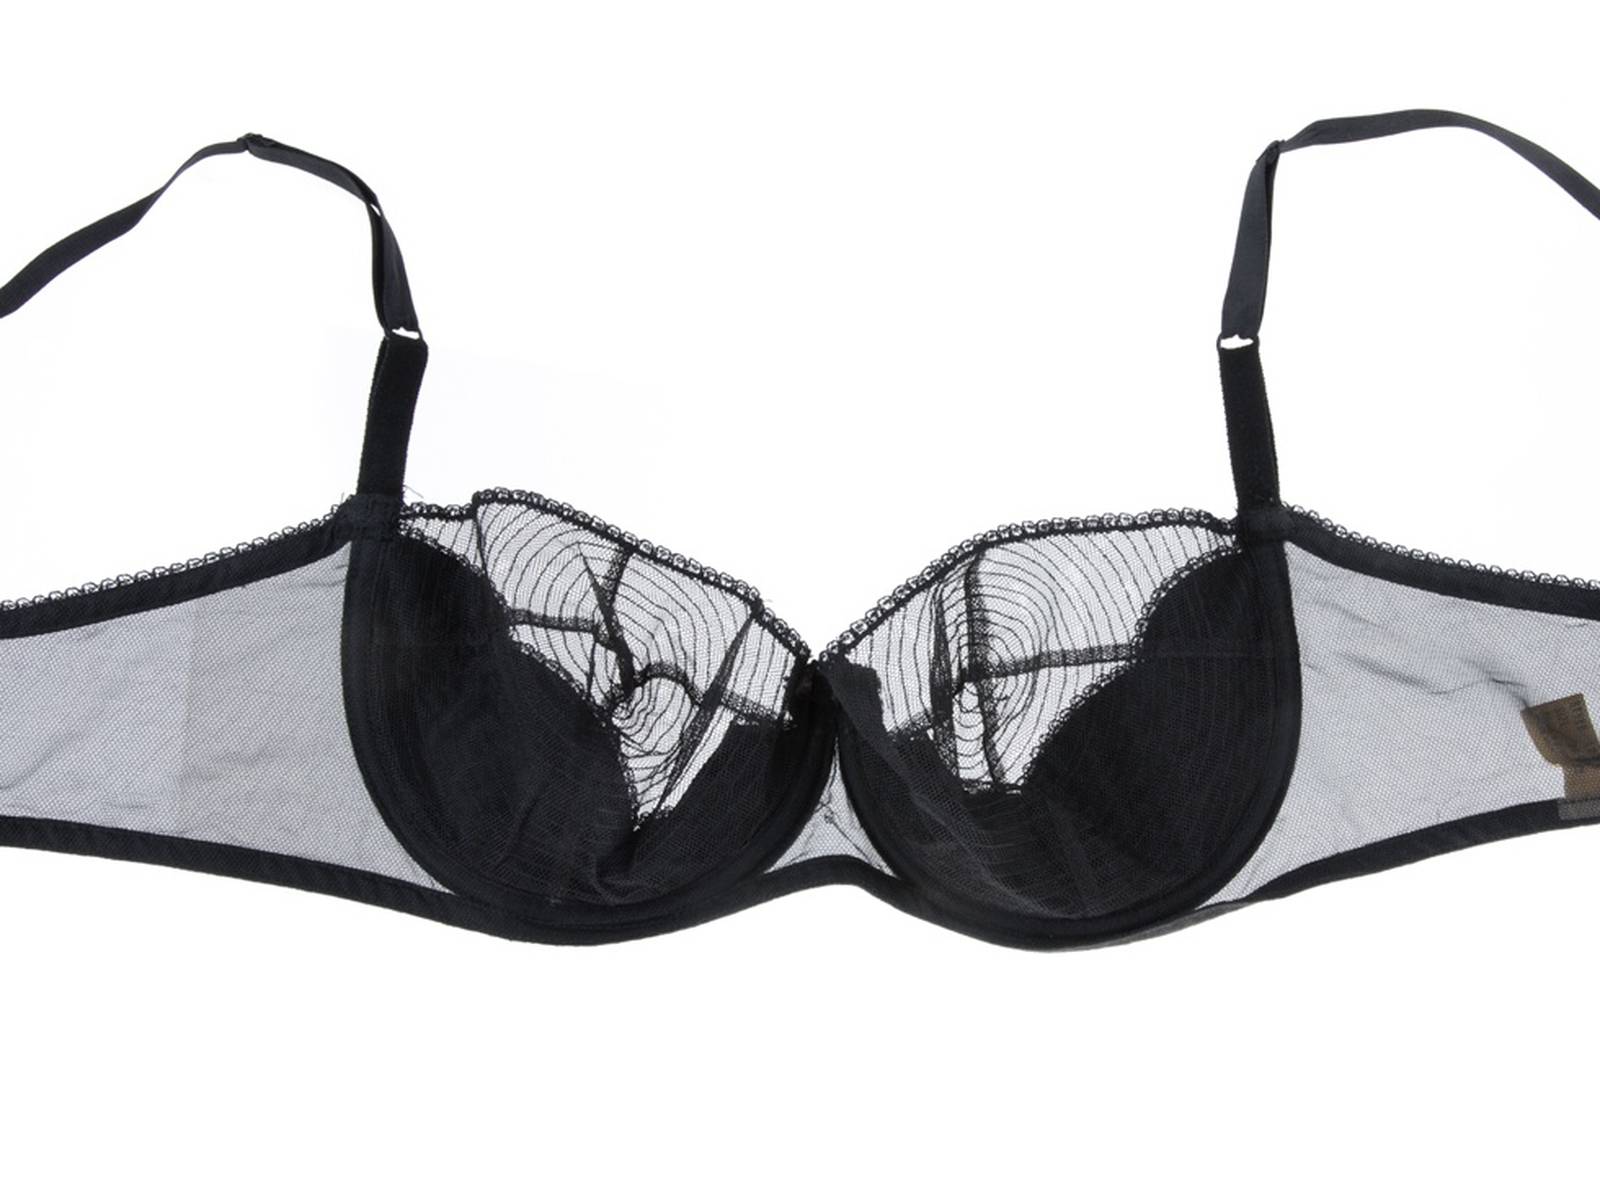 Marilyn Monroe's bra and stockings up for auction, The Independent